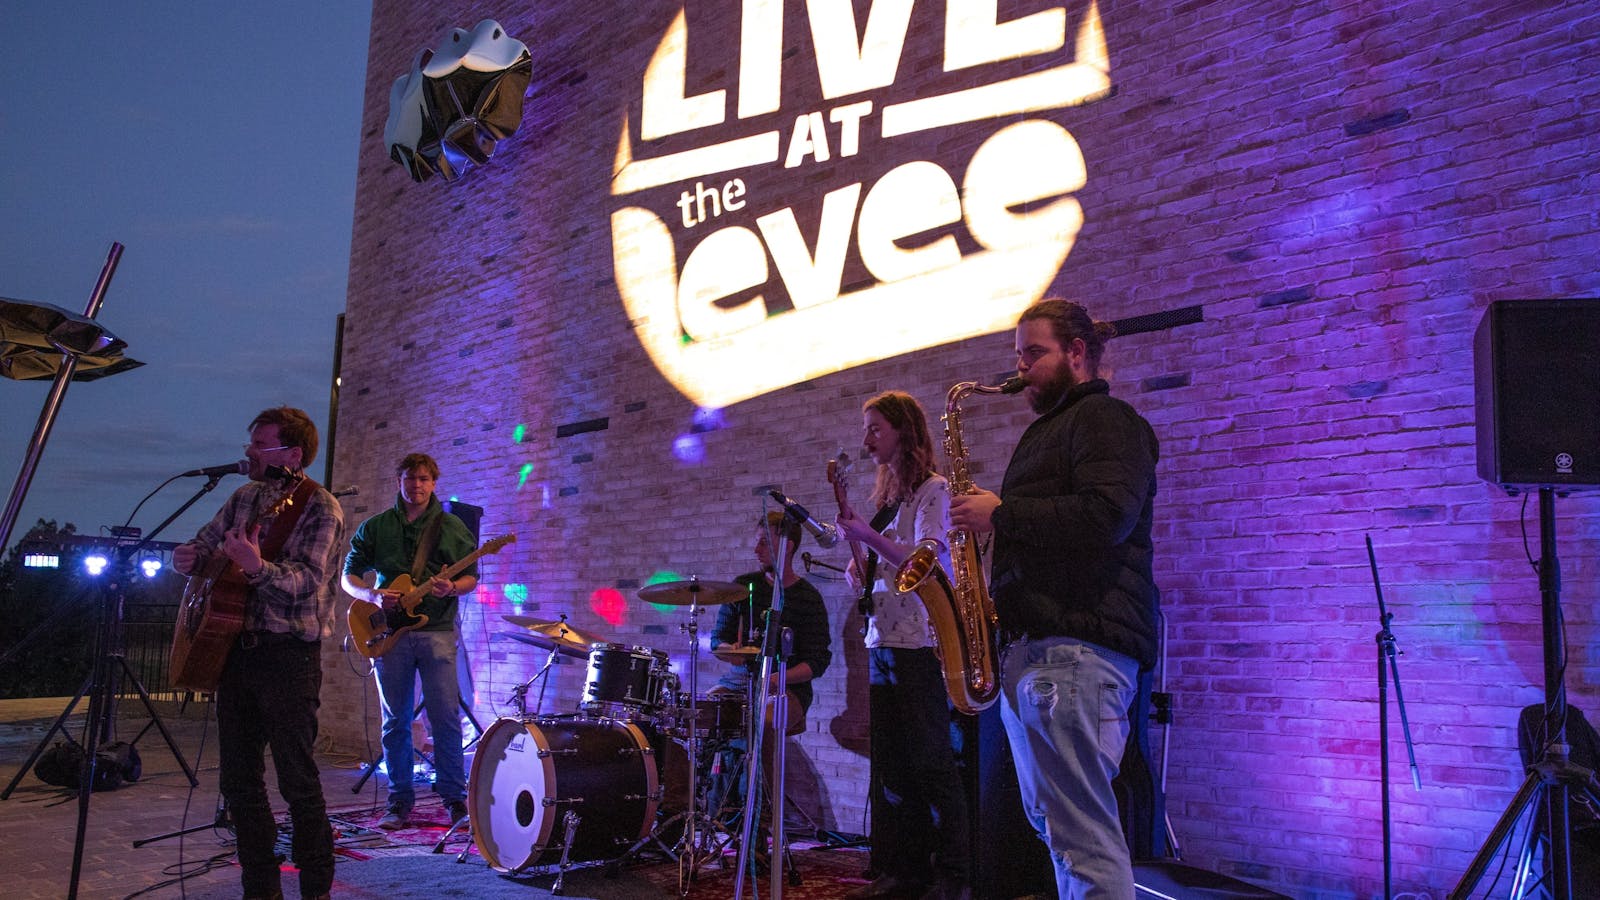 Live at the Levee